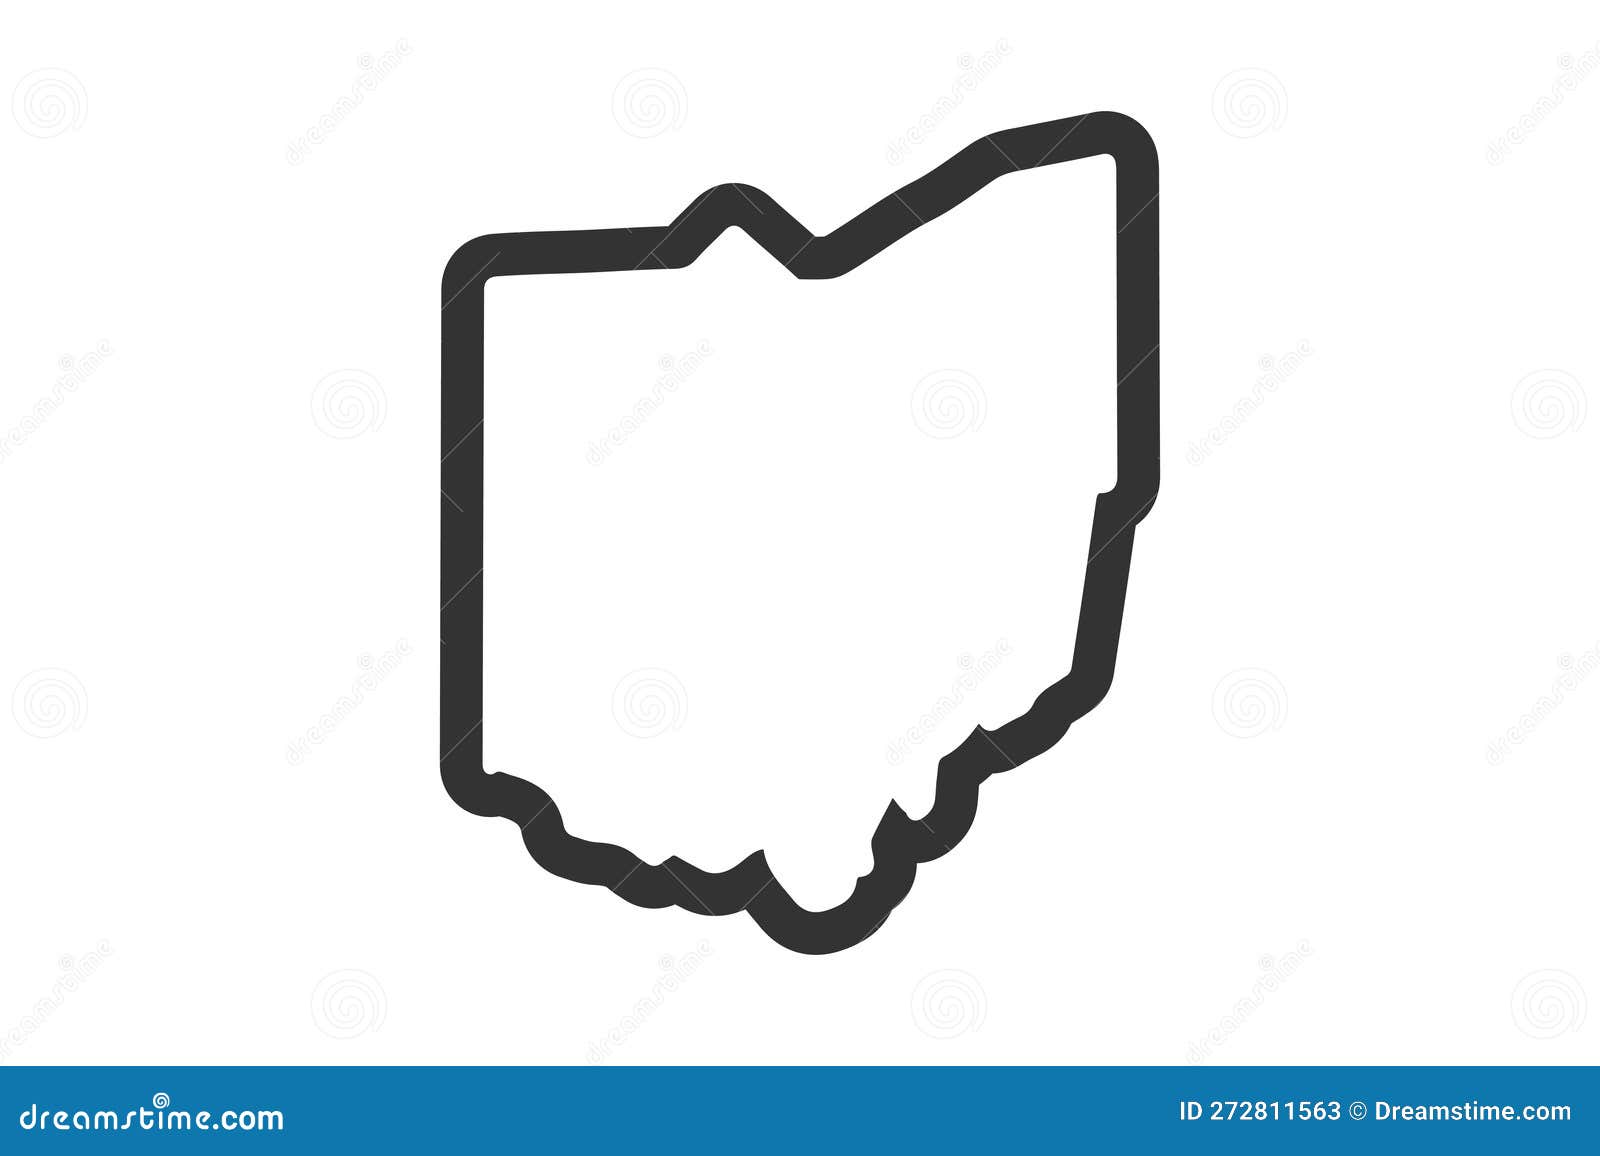 Ohio Outline Tattoo with Script - wide 4